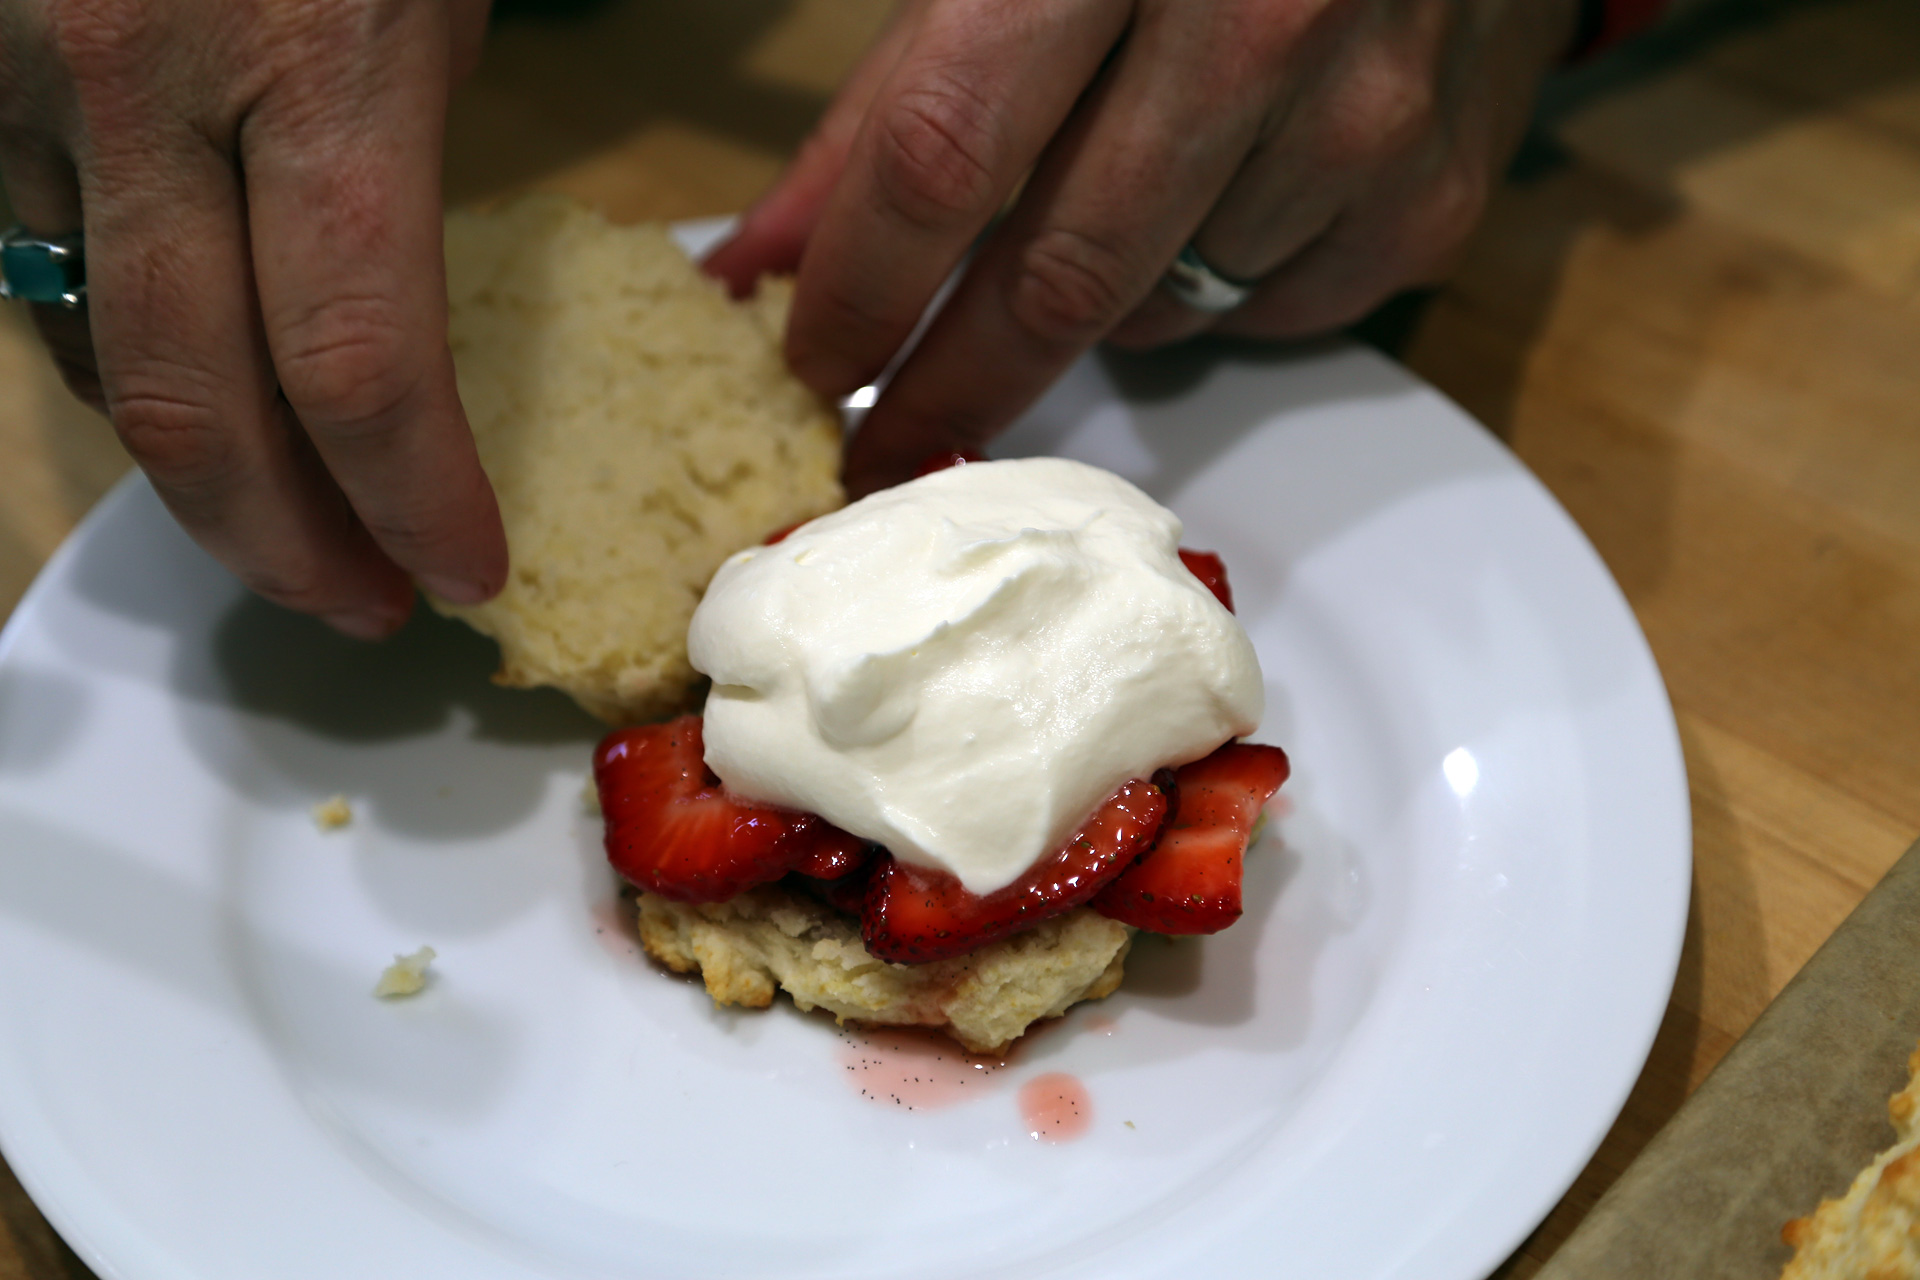 Top with a heaping spoonful of strawberries with the juices, some whipped cream.